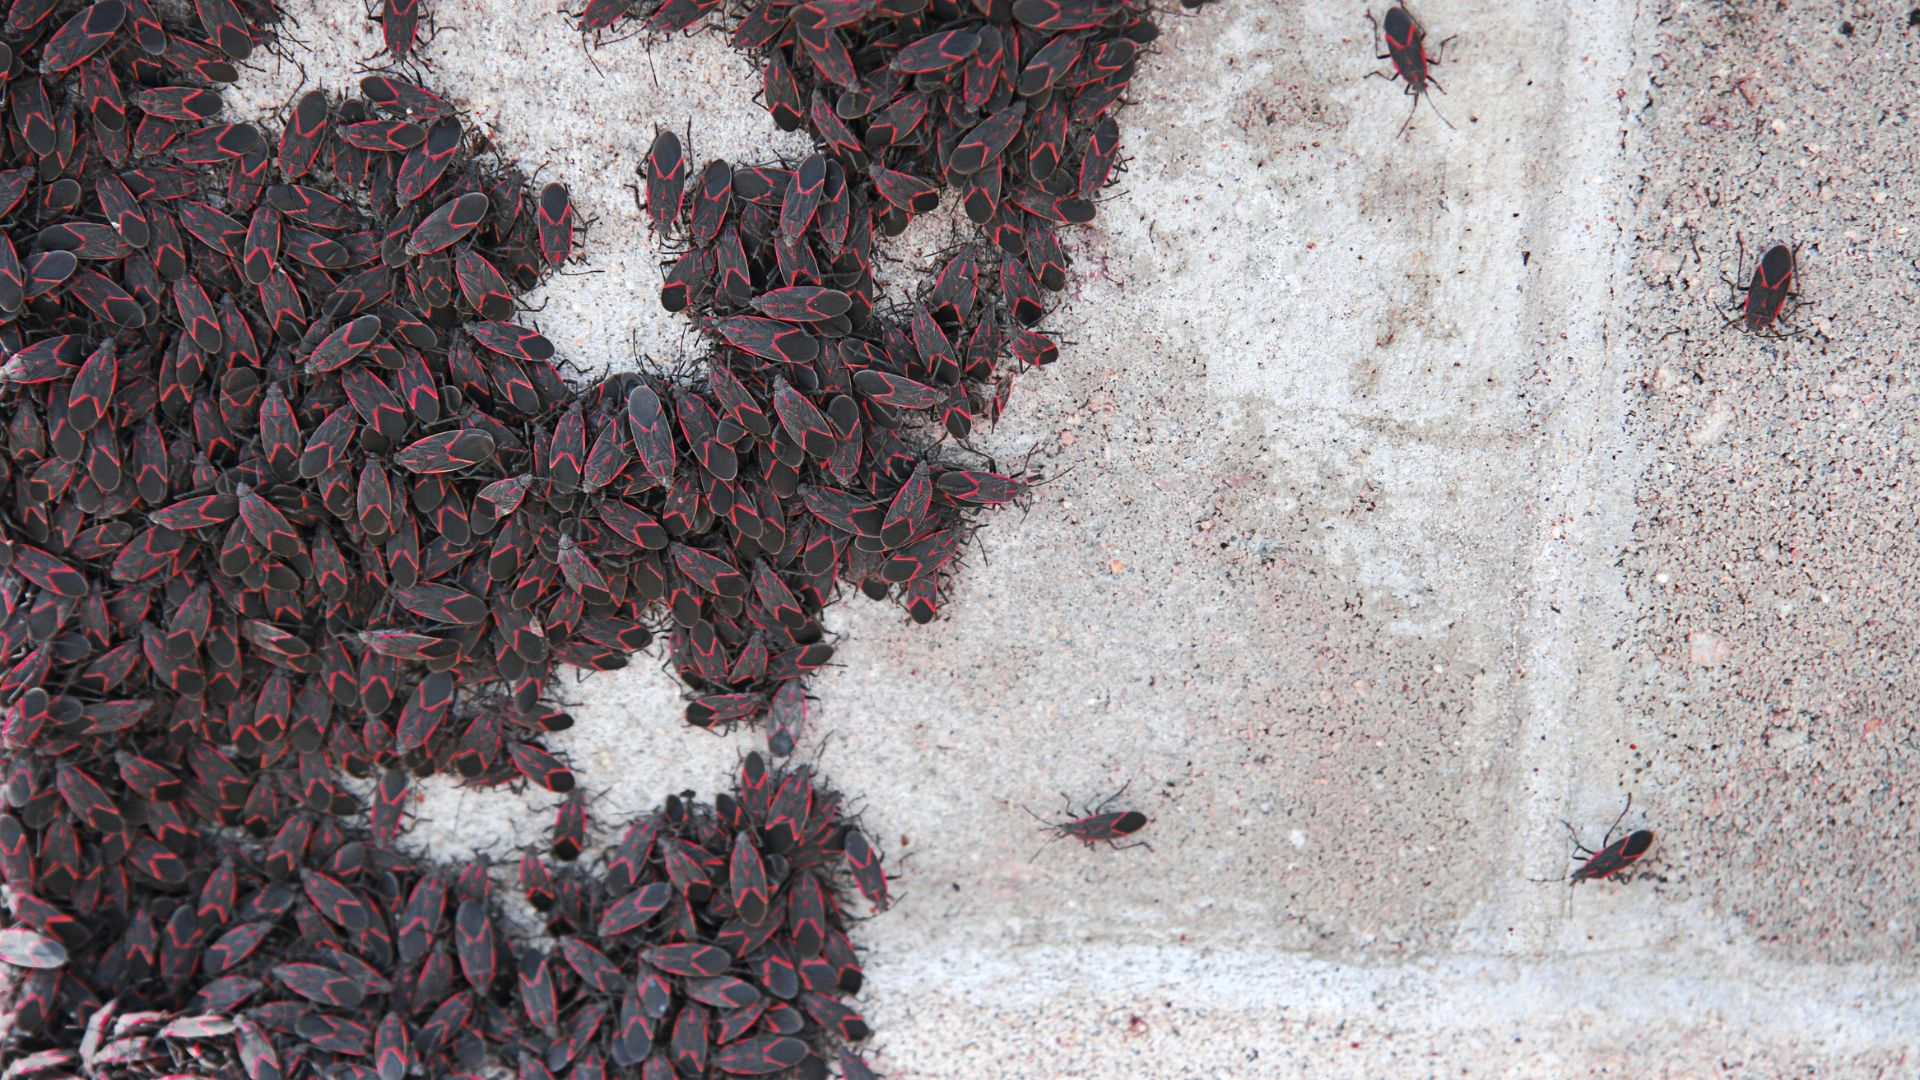 An image of box elders swarming on gray concrete outside.